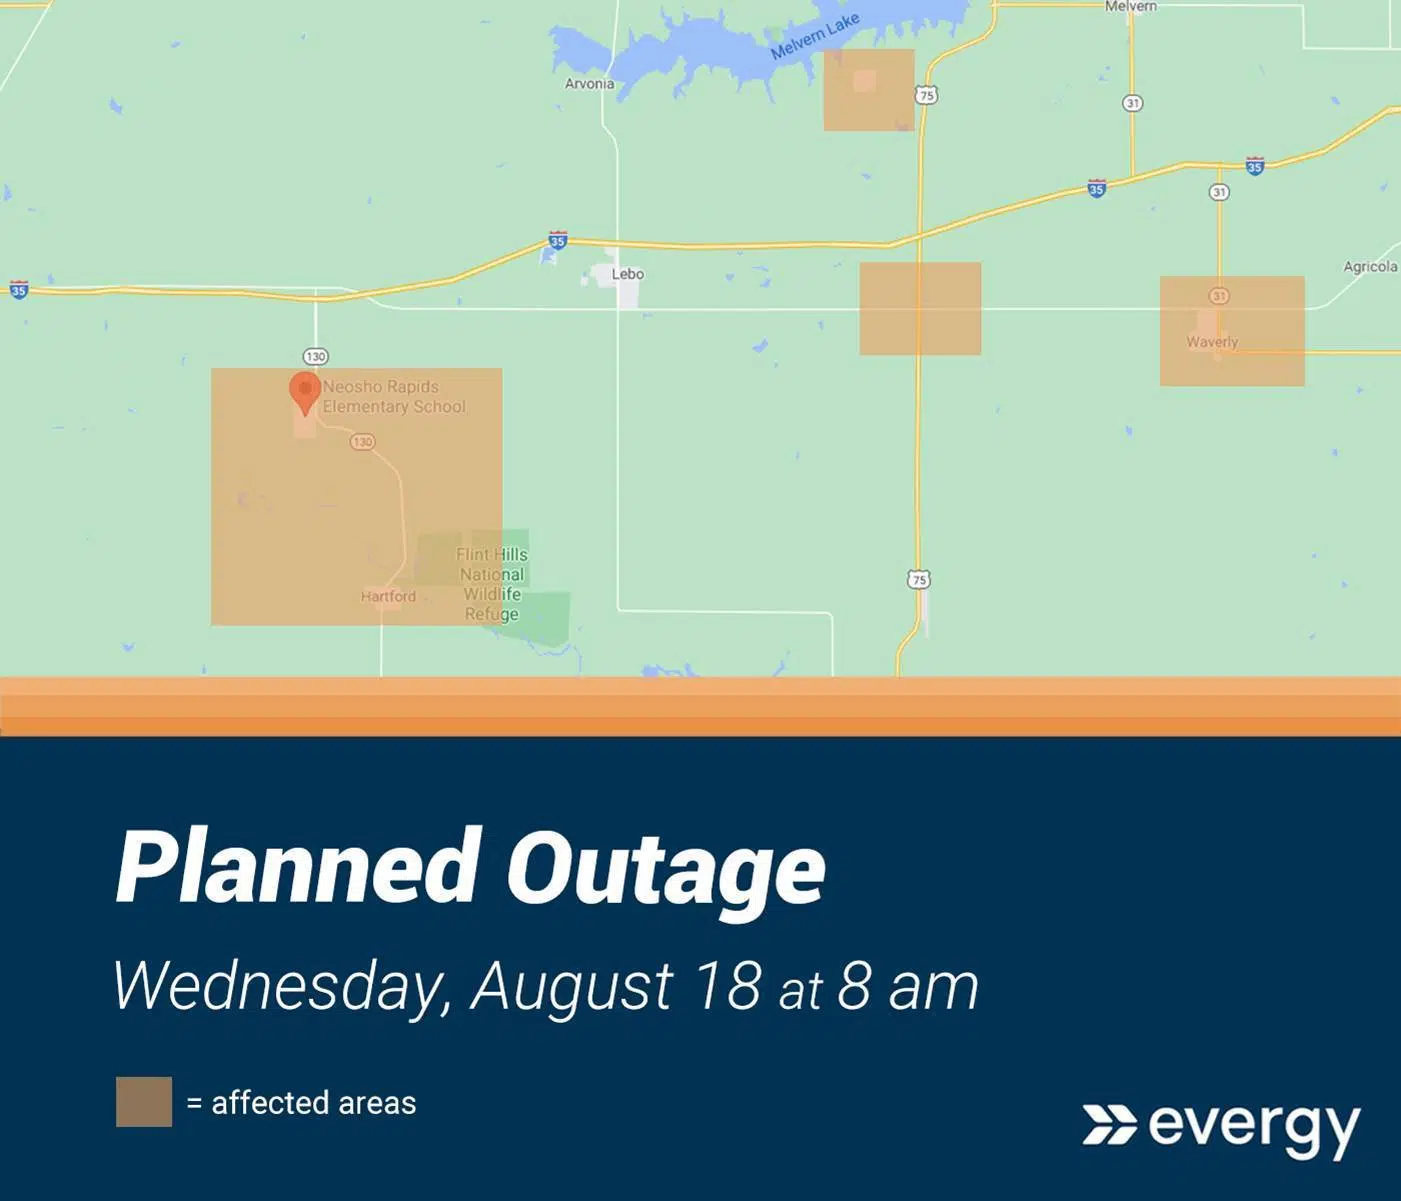 Evergy announces several planned power outages Wednesday near Emporia